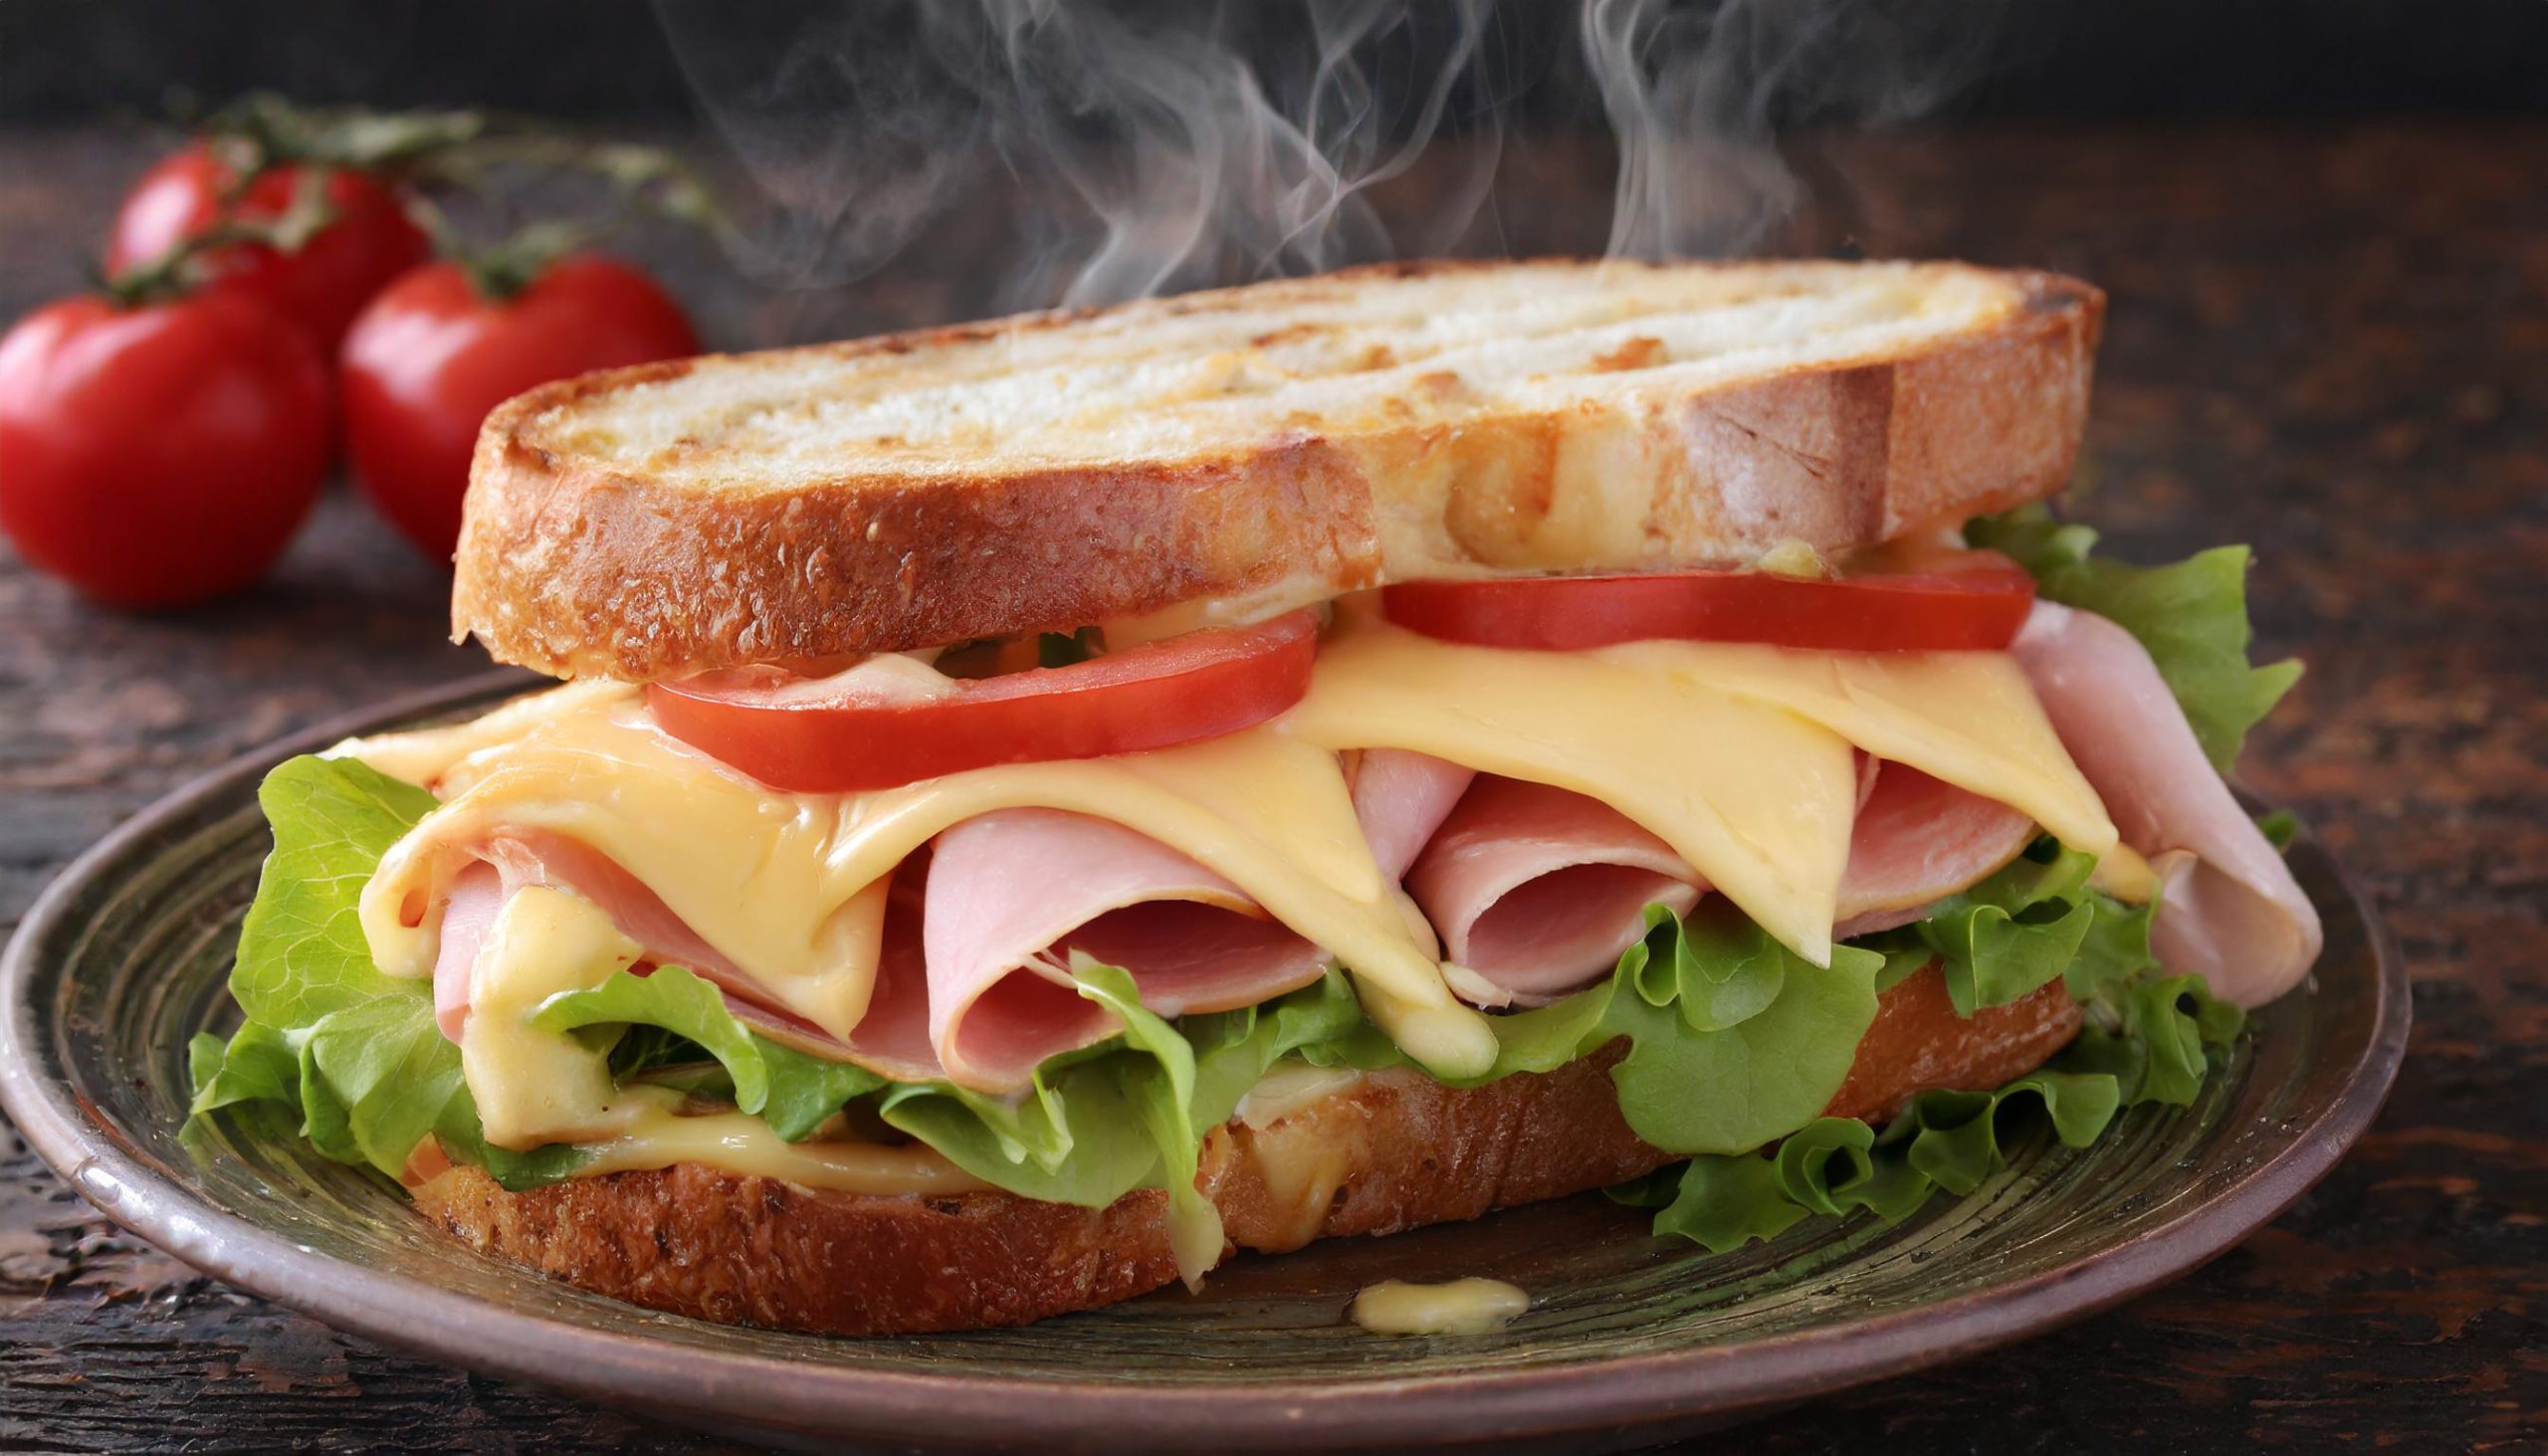 Hot ham and cheese sandwich